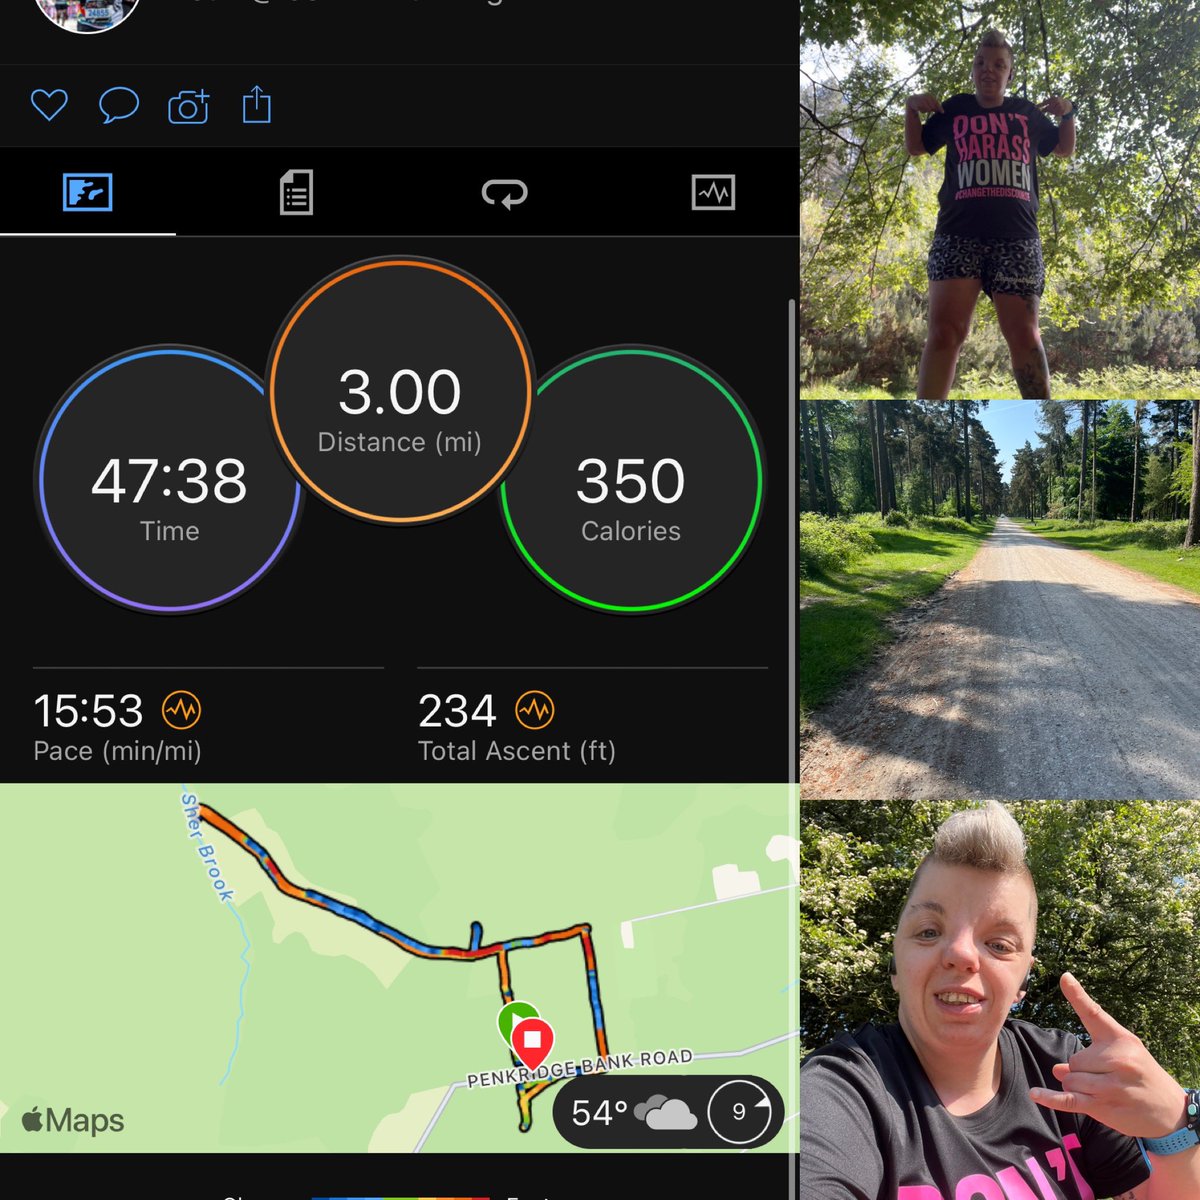 Sunday run day 3miles for my #runningpunksvrc did couch to 5k week 3 run 2 twice as I was very comfortable I did also get a little lost on the trails but found my way. Had a lady comment about my shirt saying it was awesome and was asking me about @runningpunks #ukrunchat